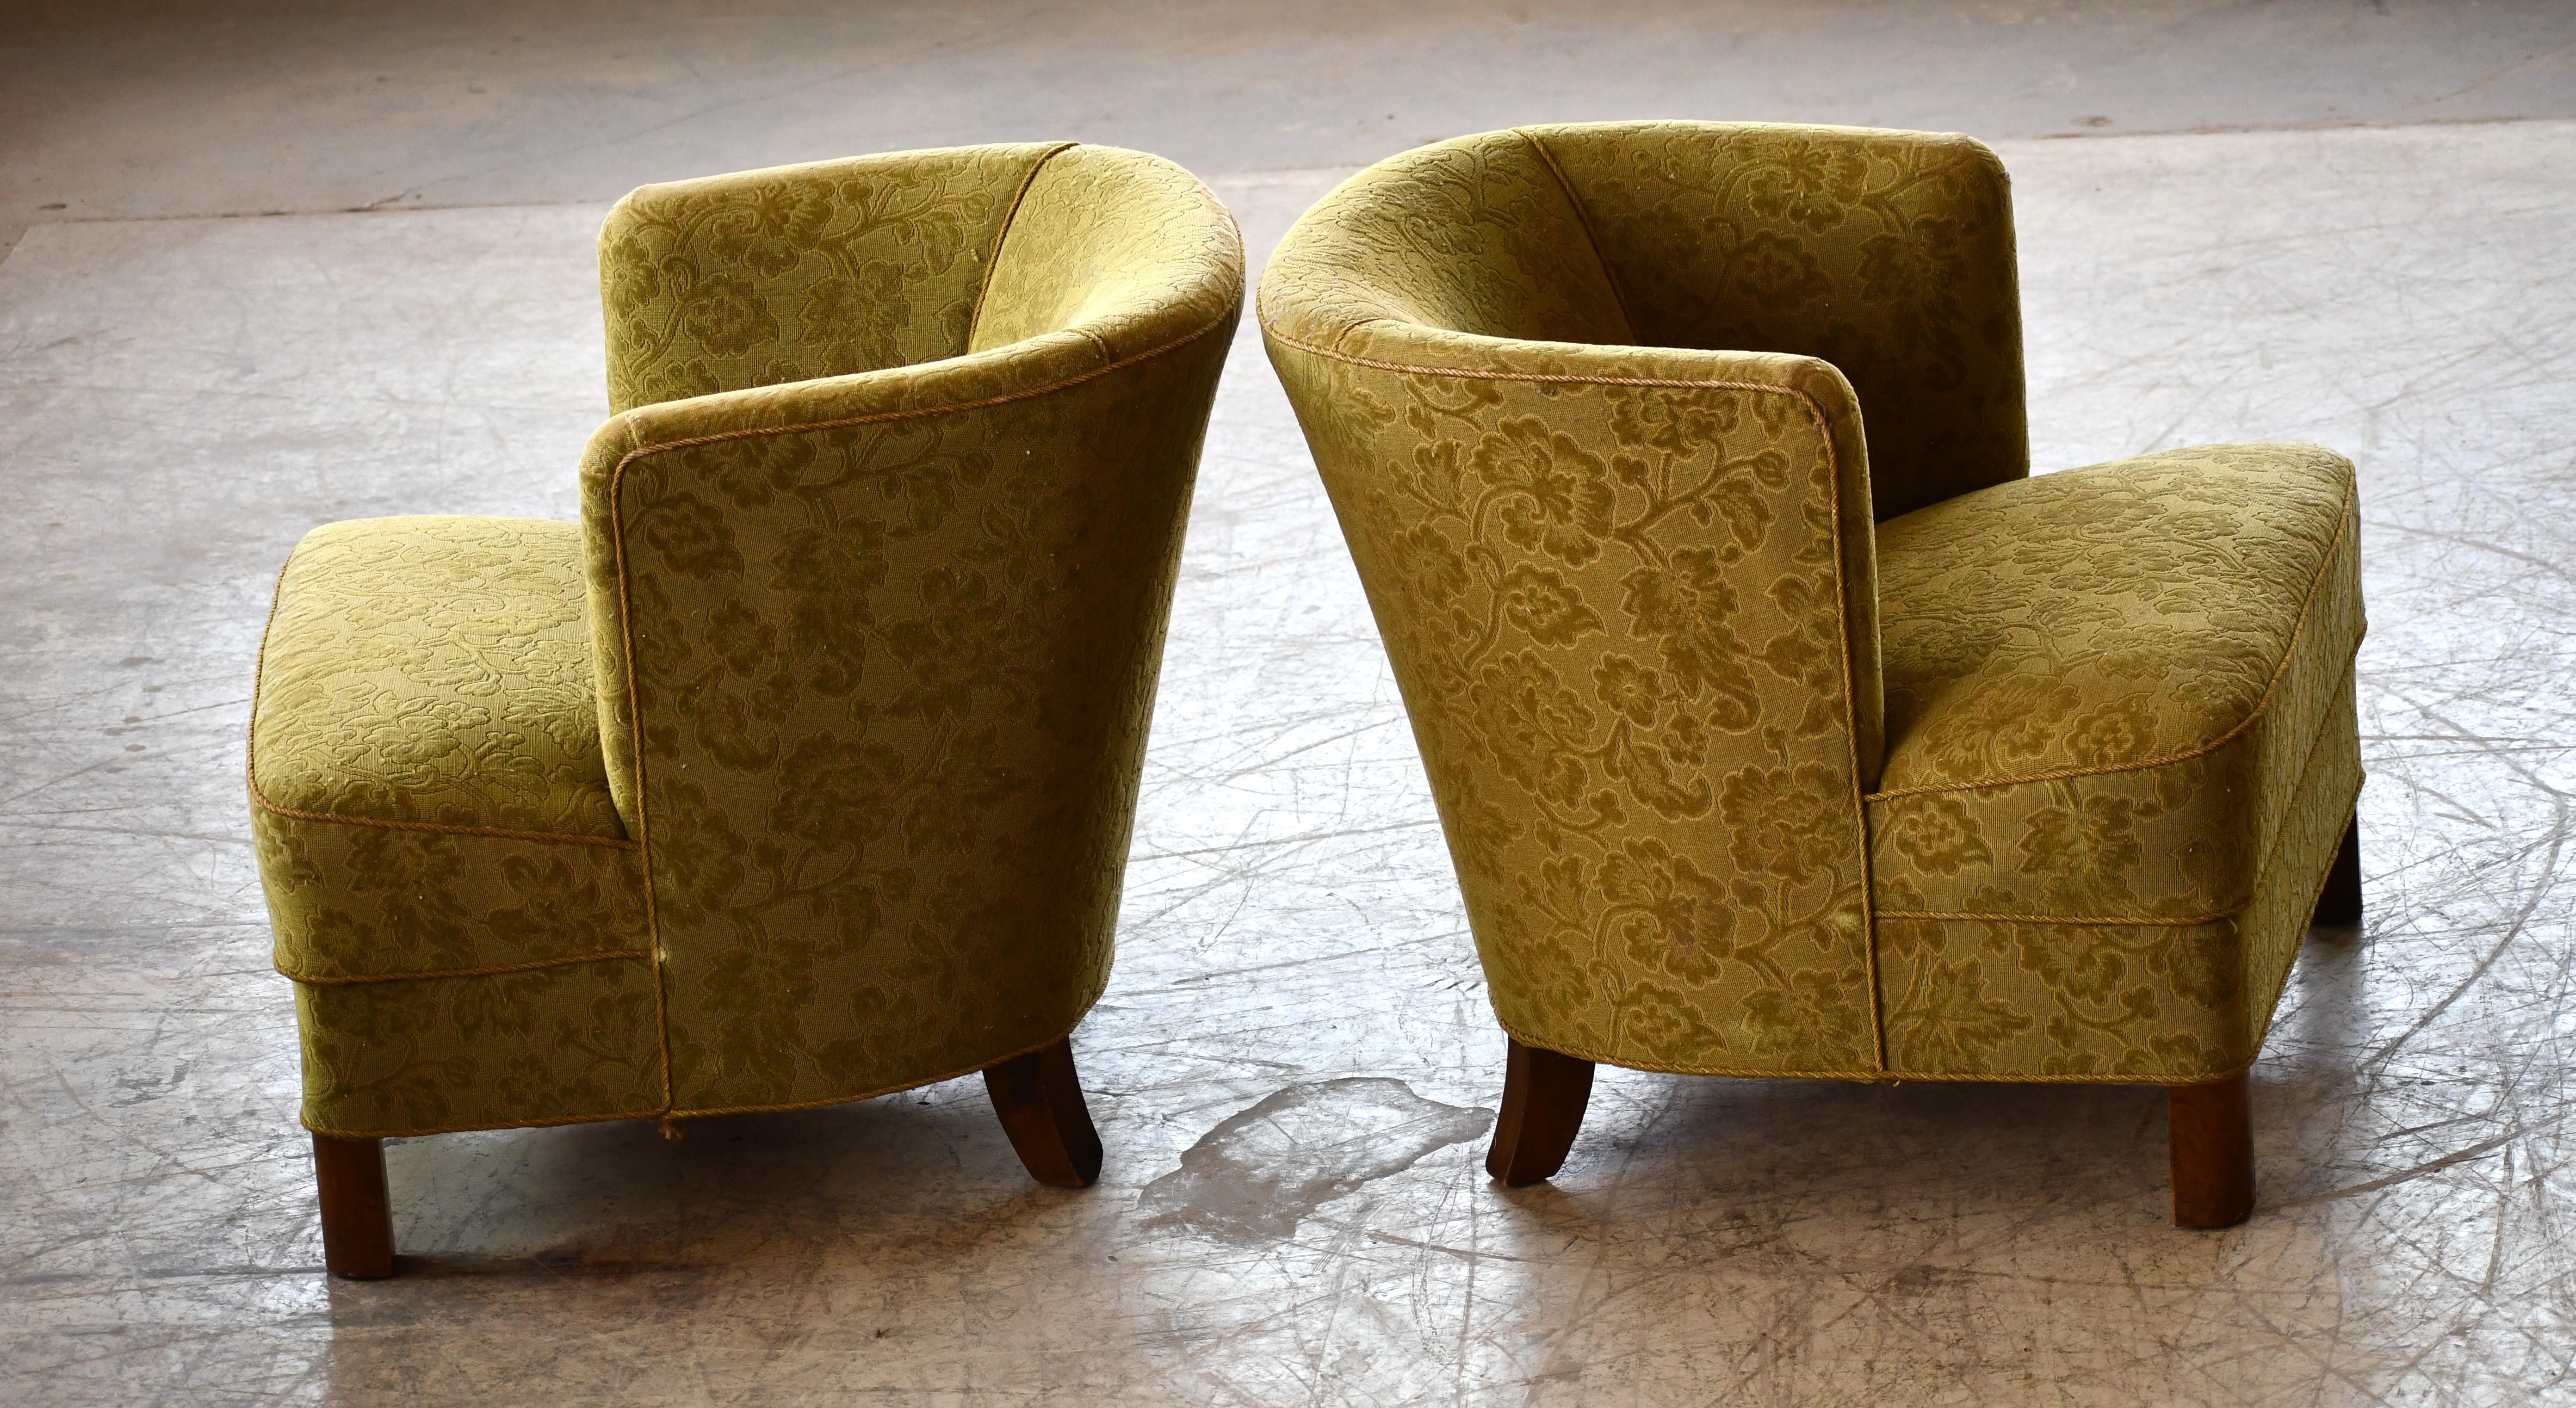 Mid-20th Century Pair of Ultracool Late Art Deco or Early Midcentury Danish Lounge Chairs 1940's